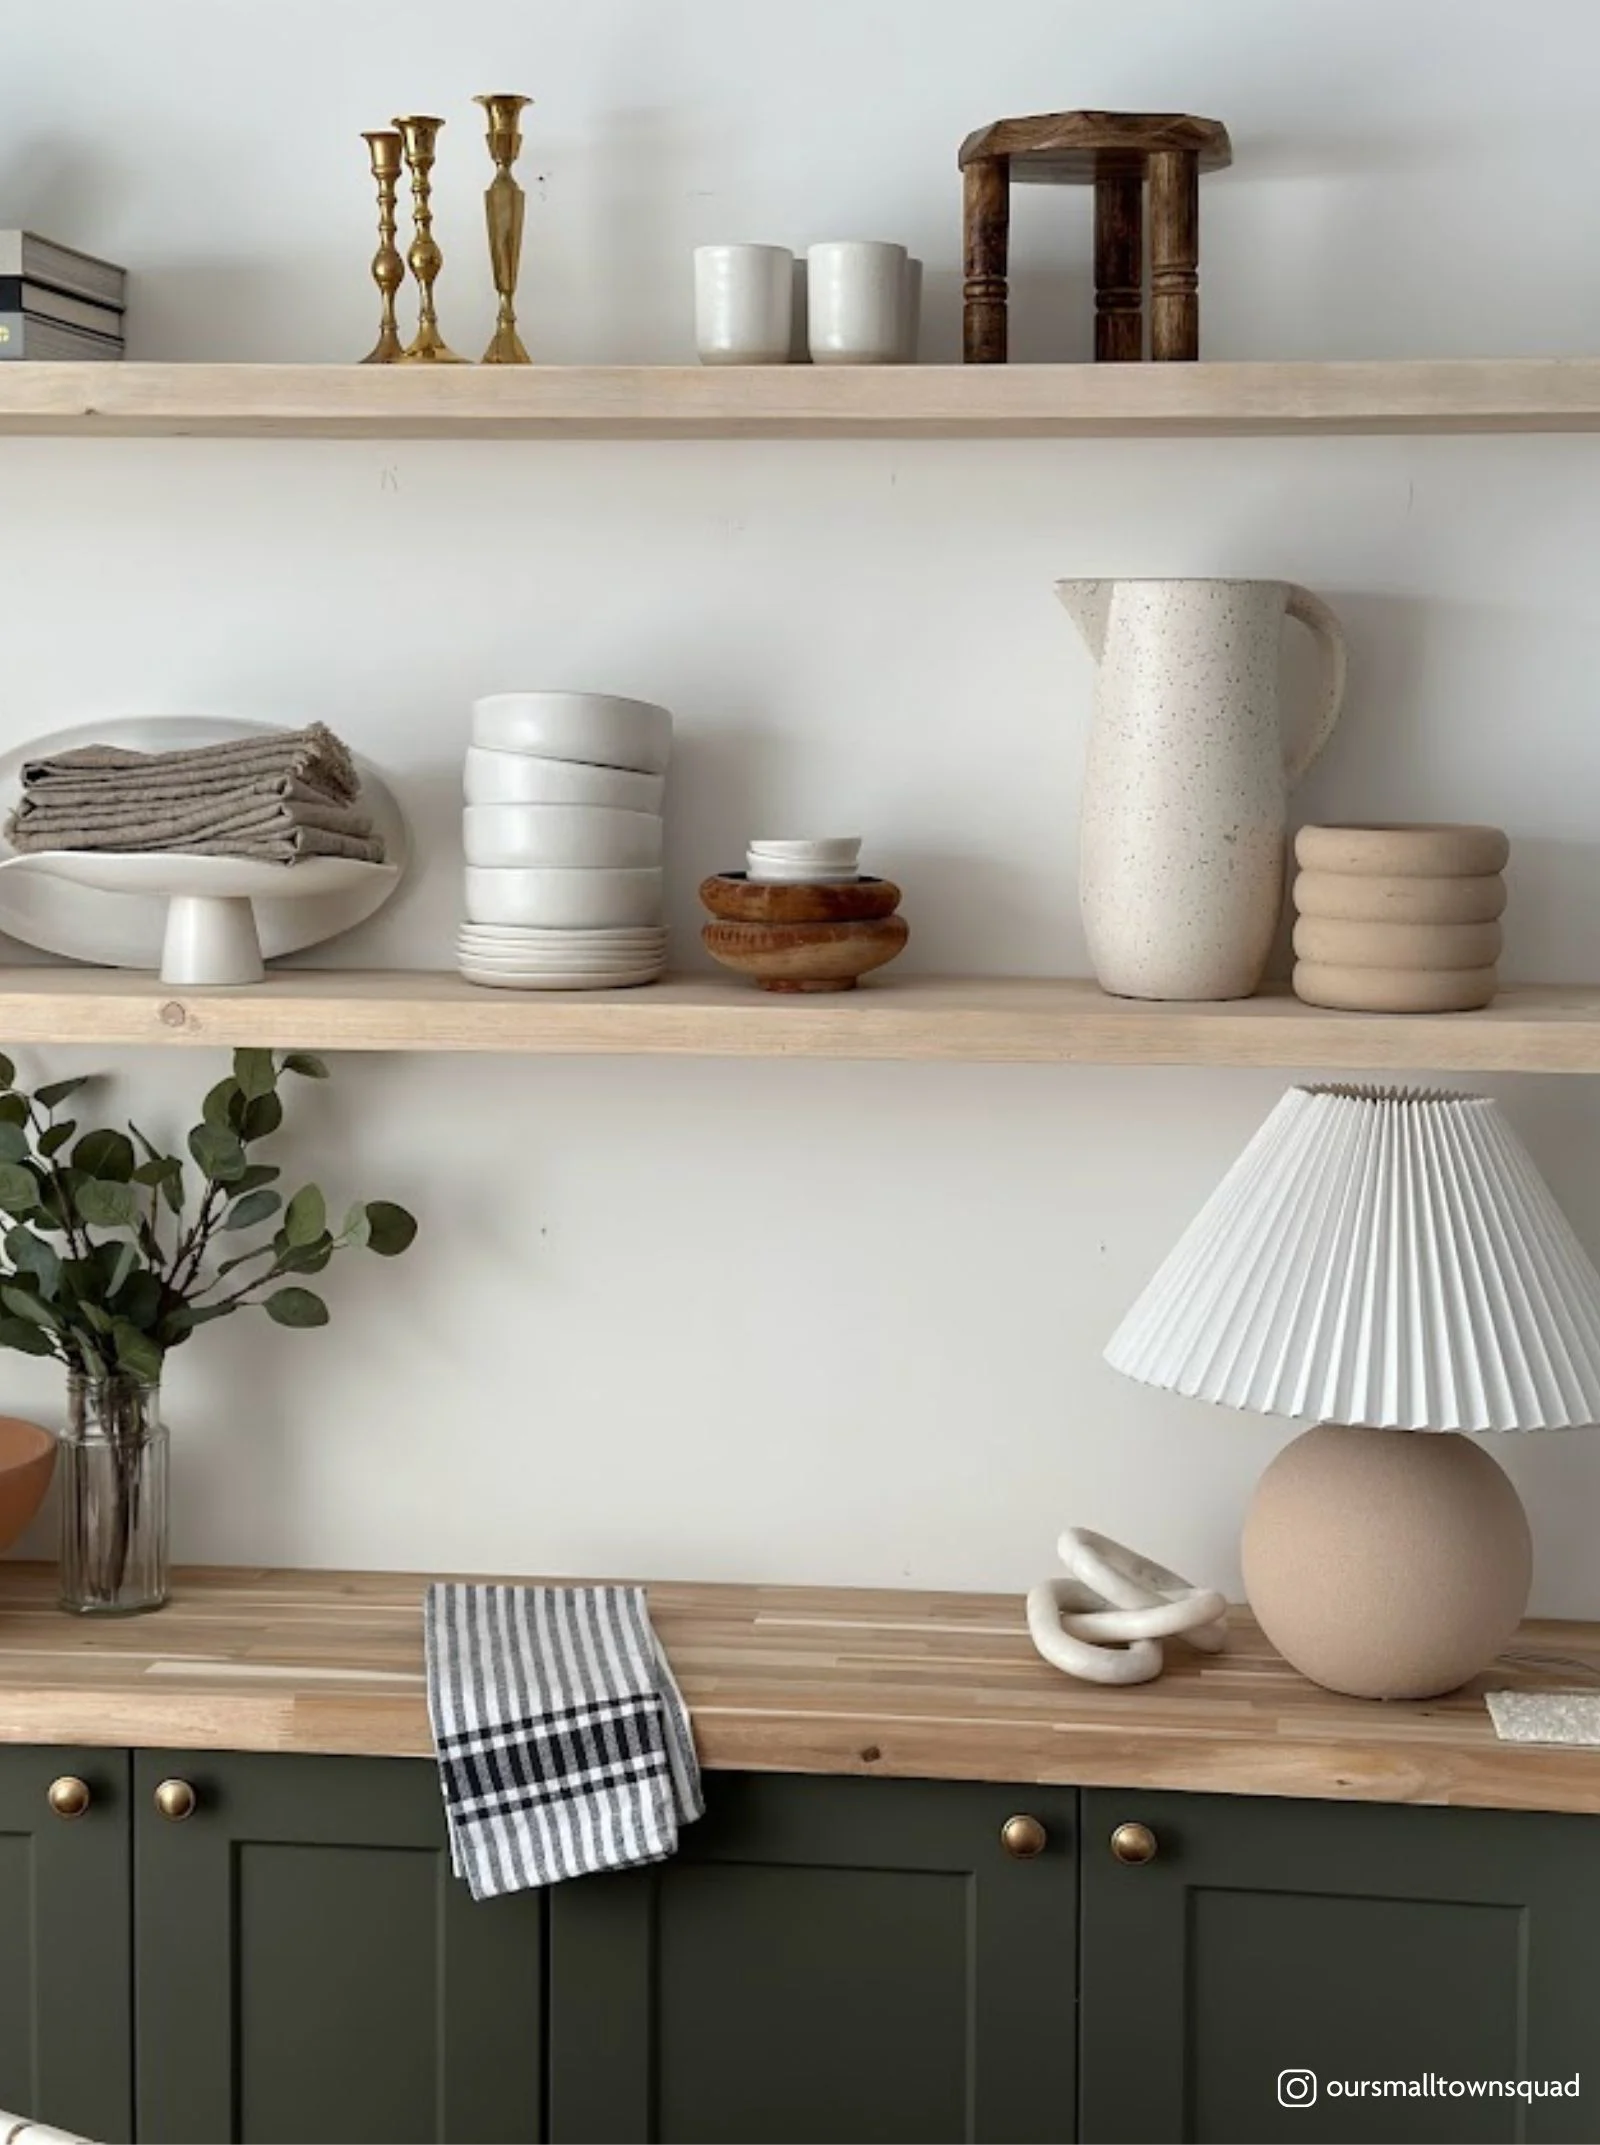 Here's How to Make Built-In Dining Room Cabinets with Floating Shelves